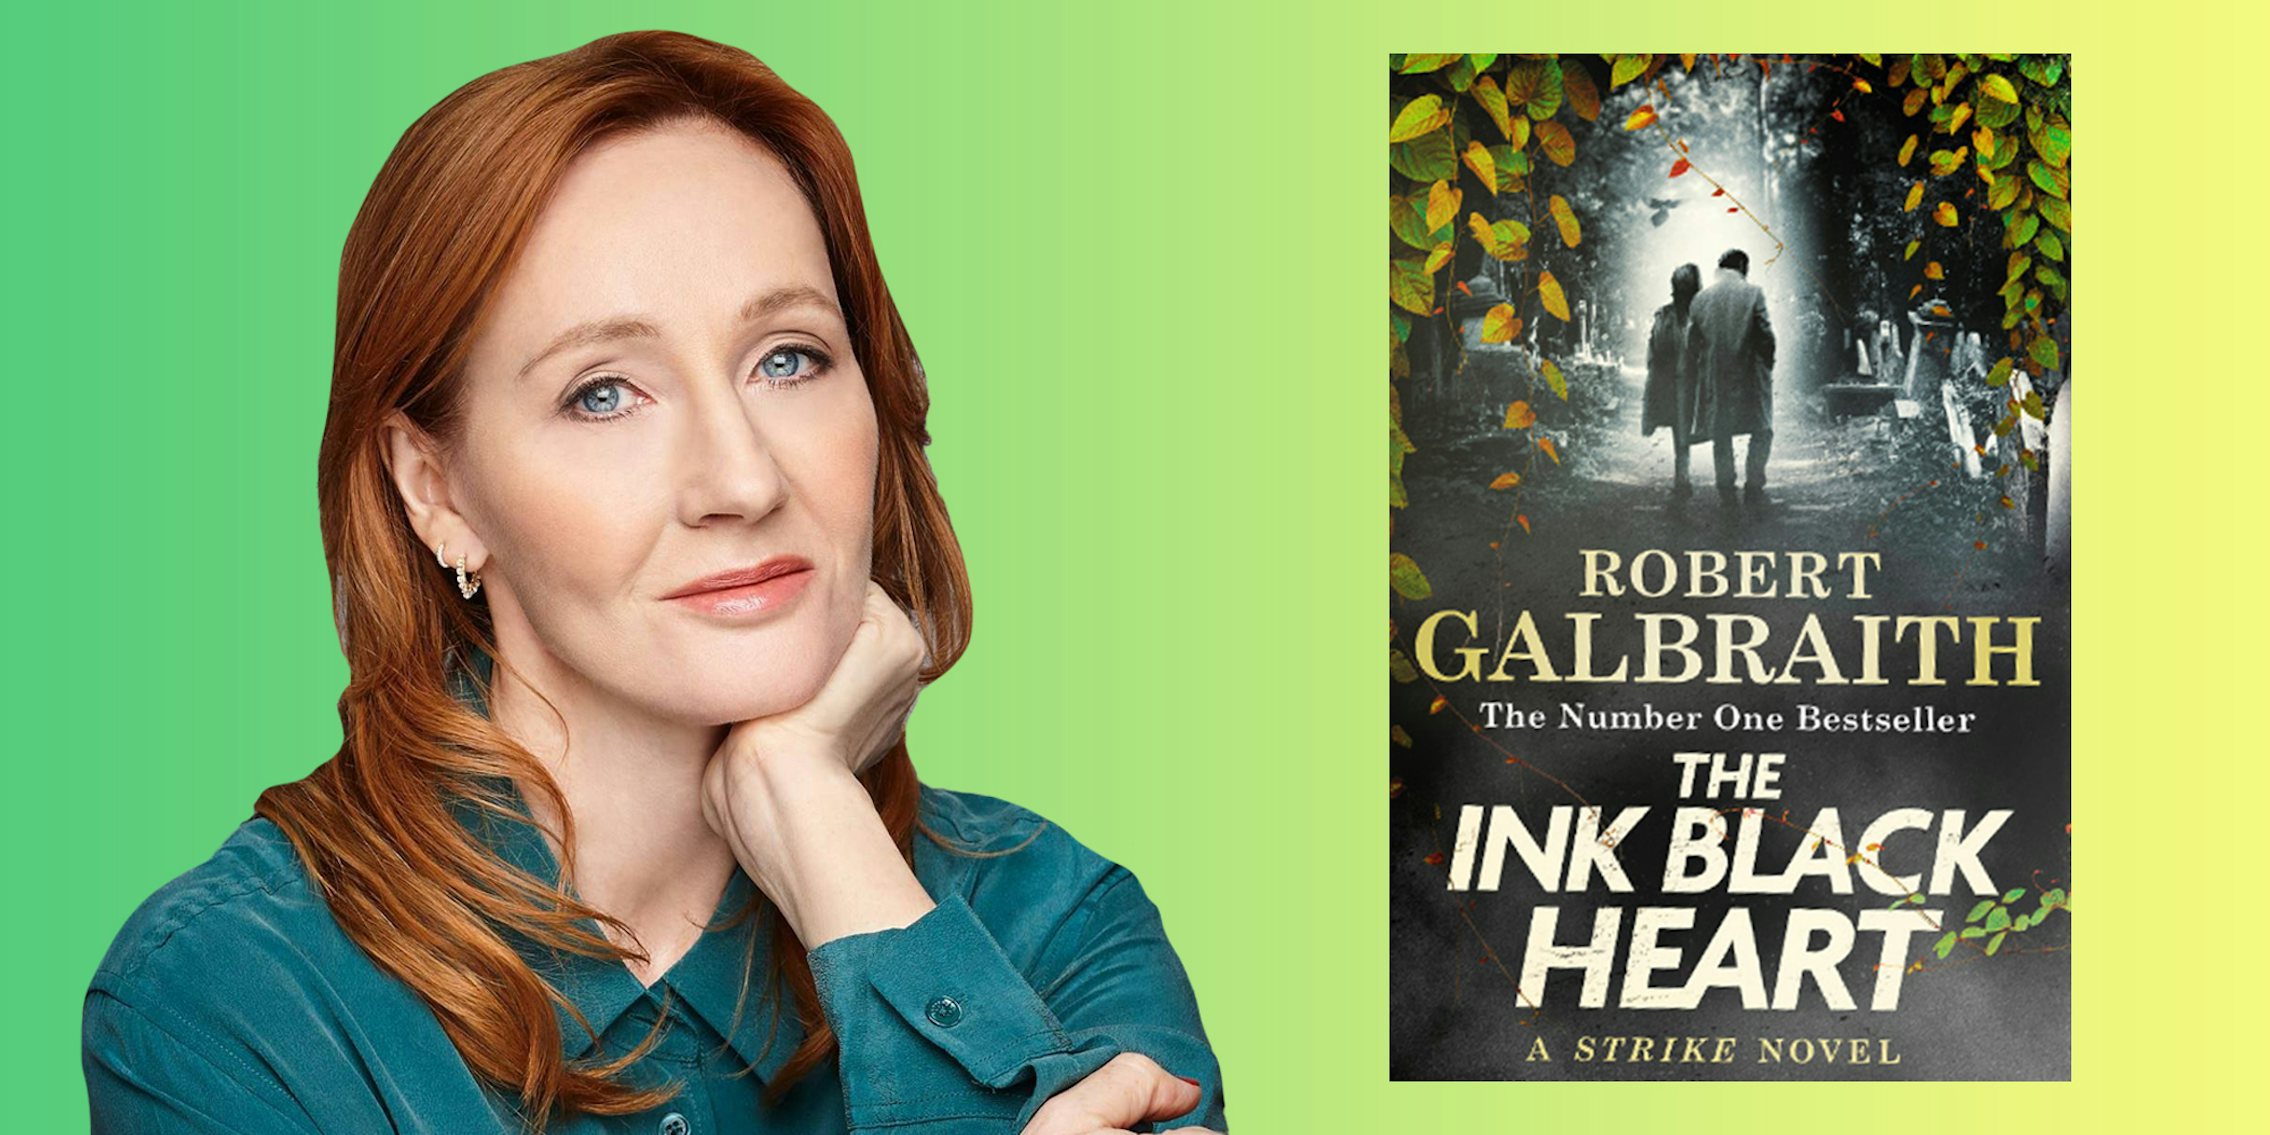 J.K. Rowling posing with hand on cheek on left with Book cover 'THE INK BLACK HEART' 'Robert Galbraith The Number One Bestseller A Strike Novel' on right on green to yellow gradient background